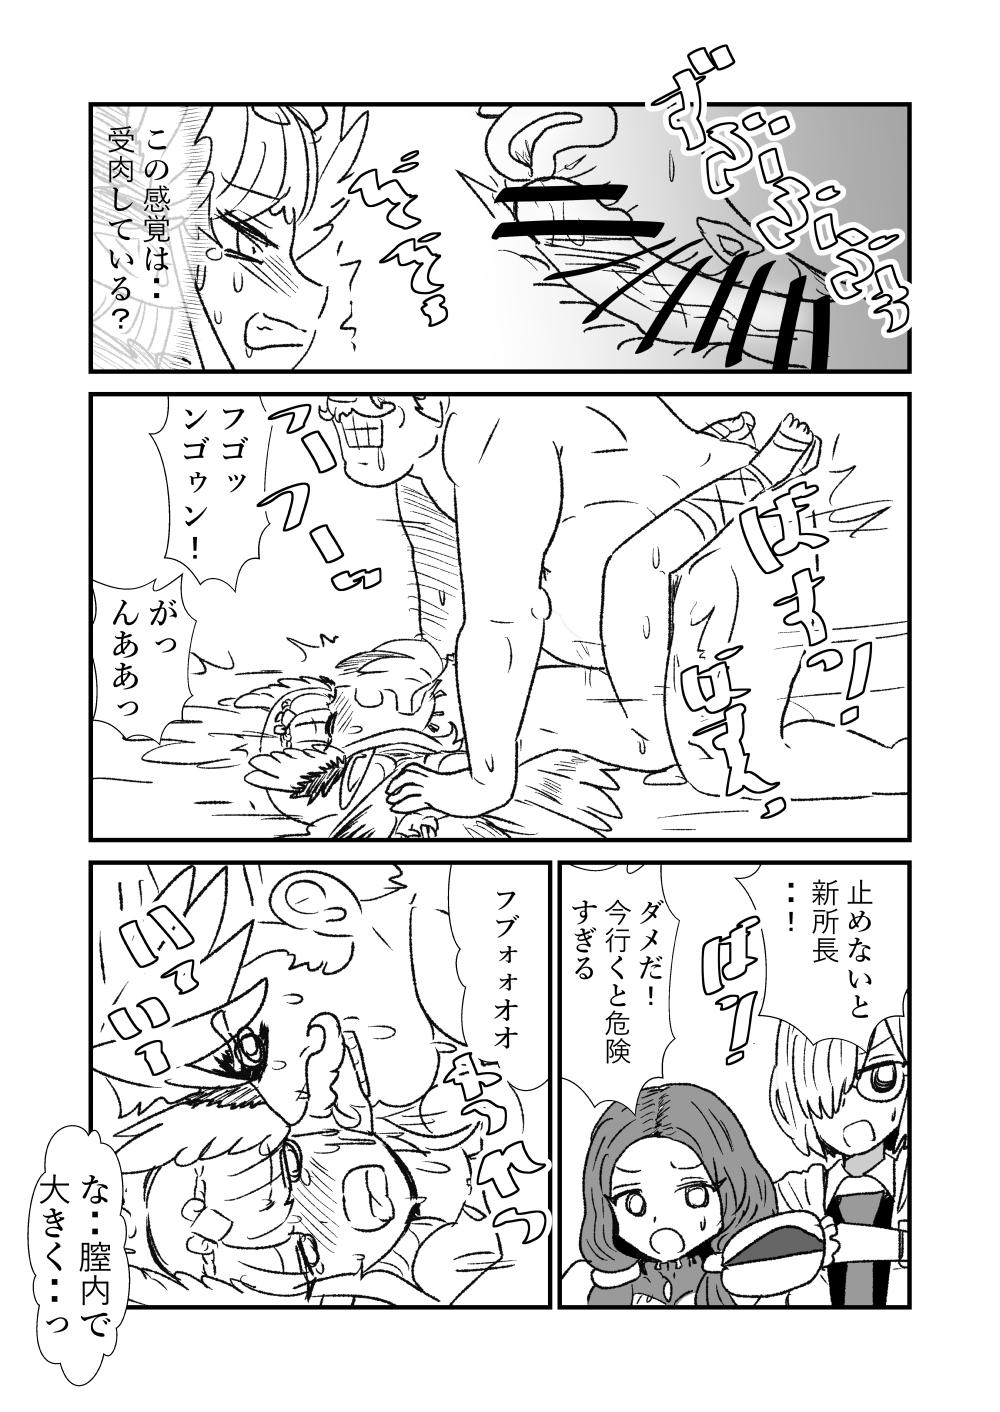 Interracial Sex FPO~桃色林檎の種付け周回～ - Fate grand order Lezbi - Page 6